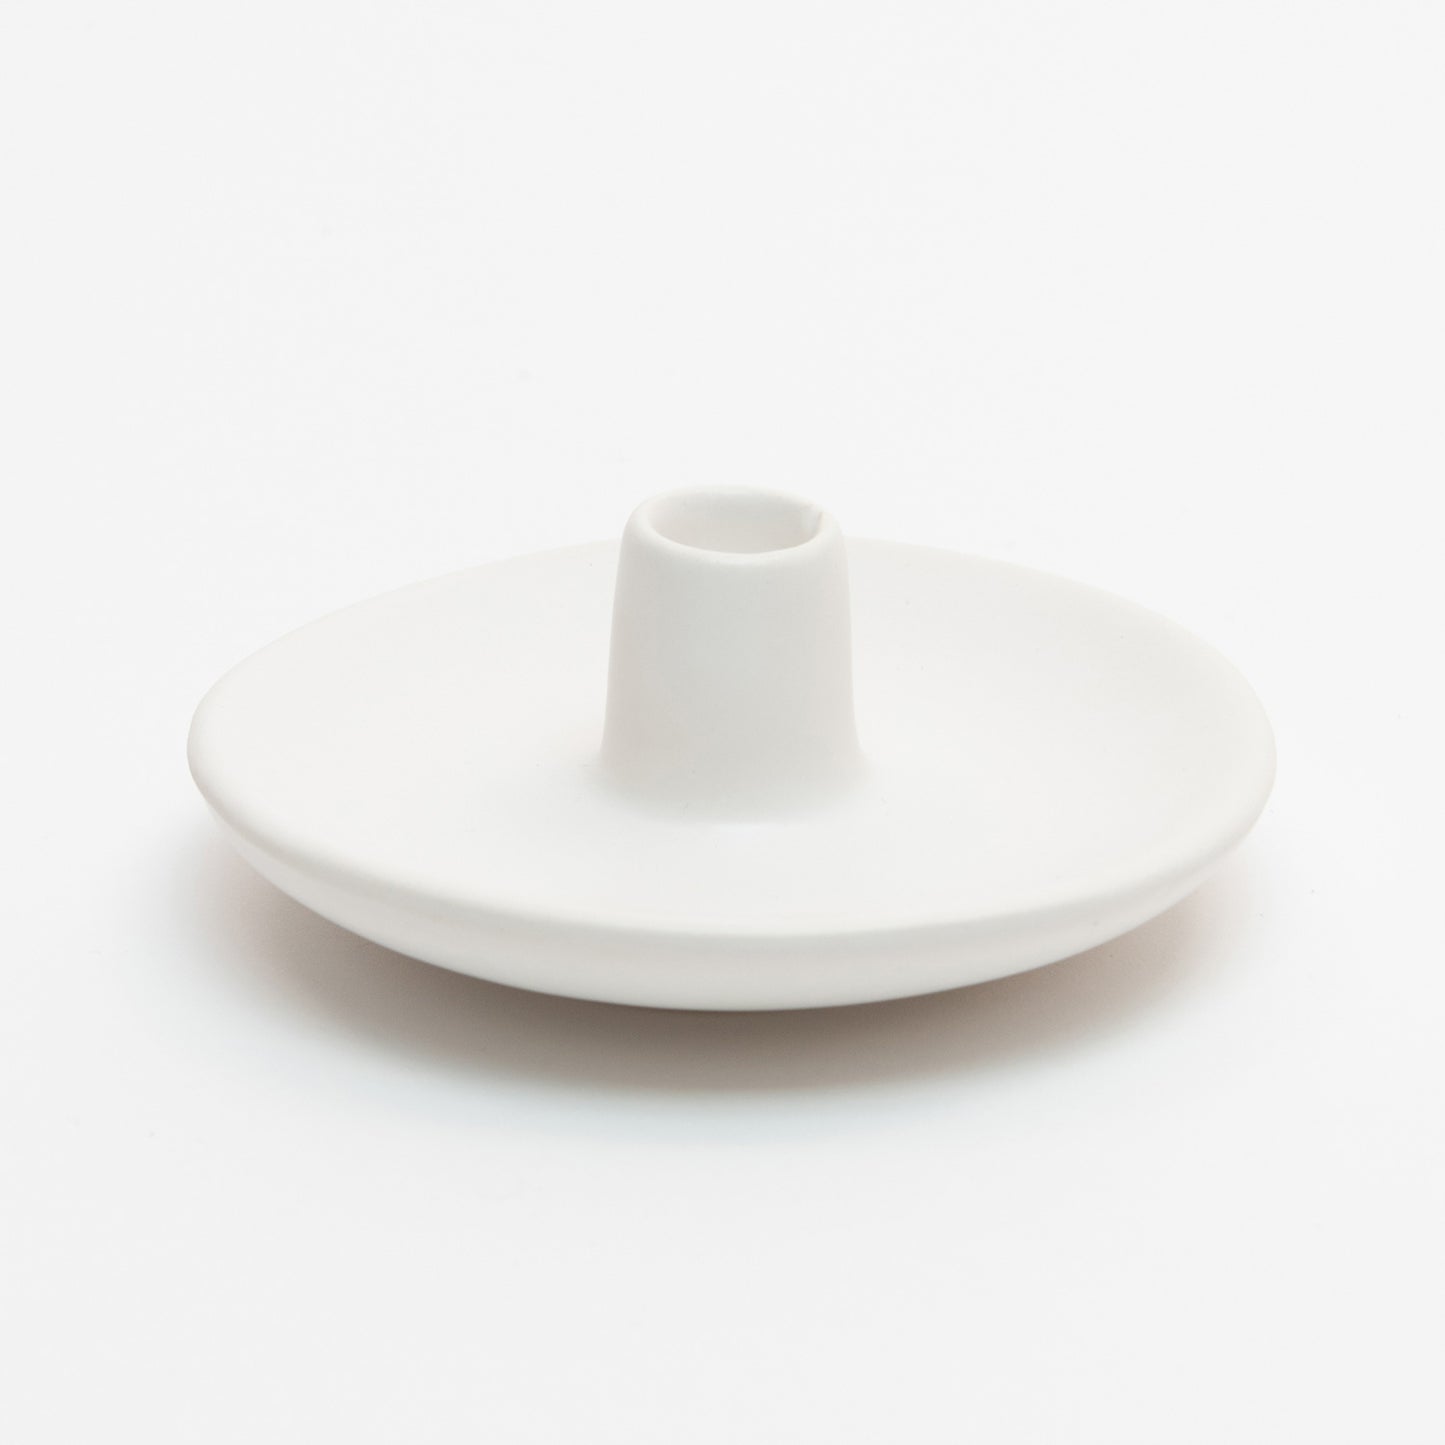 St Eval Mini Candle Holder. Small ceramic white dish with holder protruding up from centre.